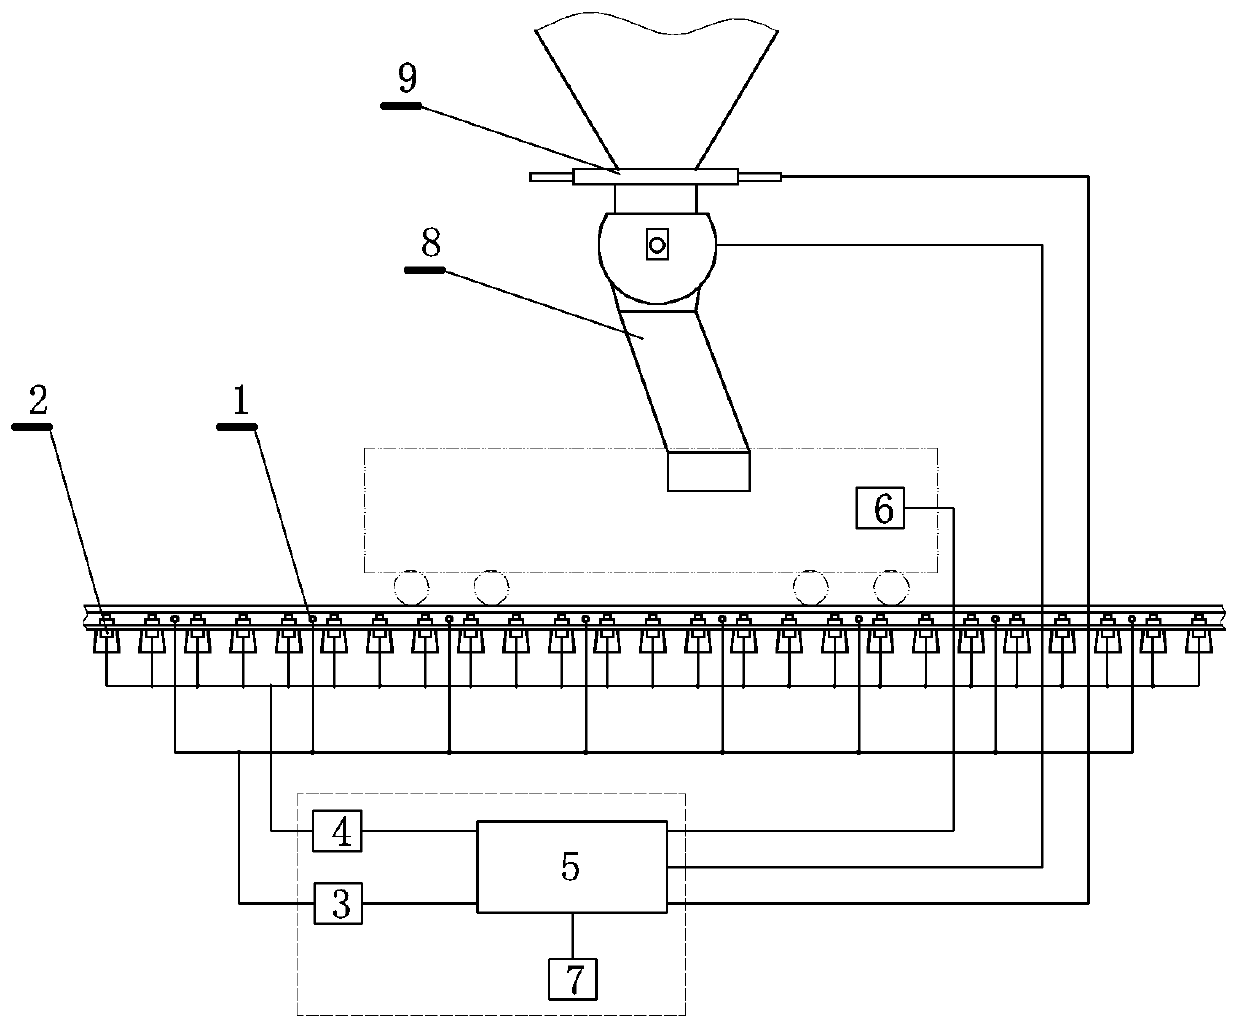 Train loading station real-time unbalance loading prevention system and method